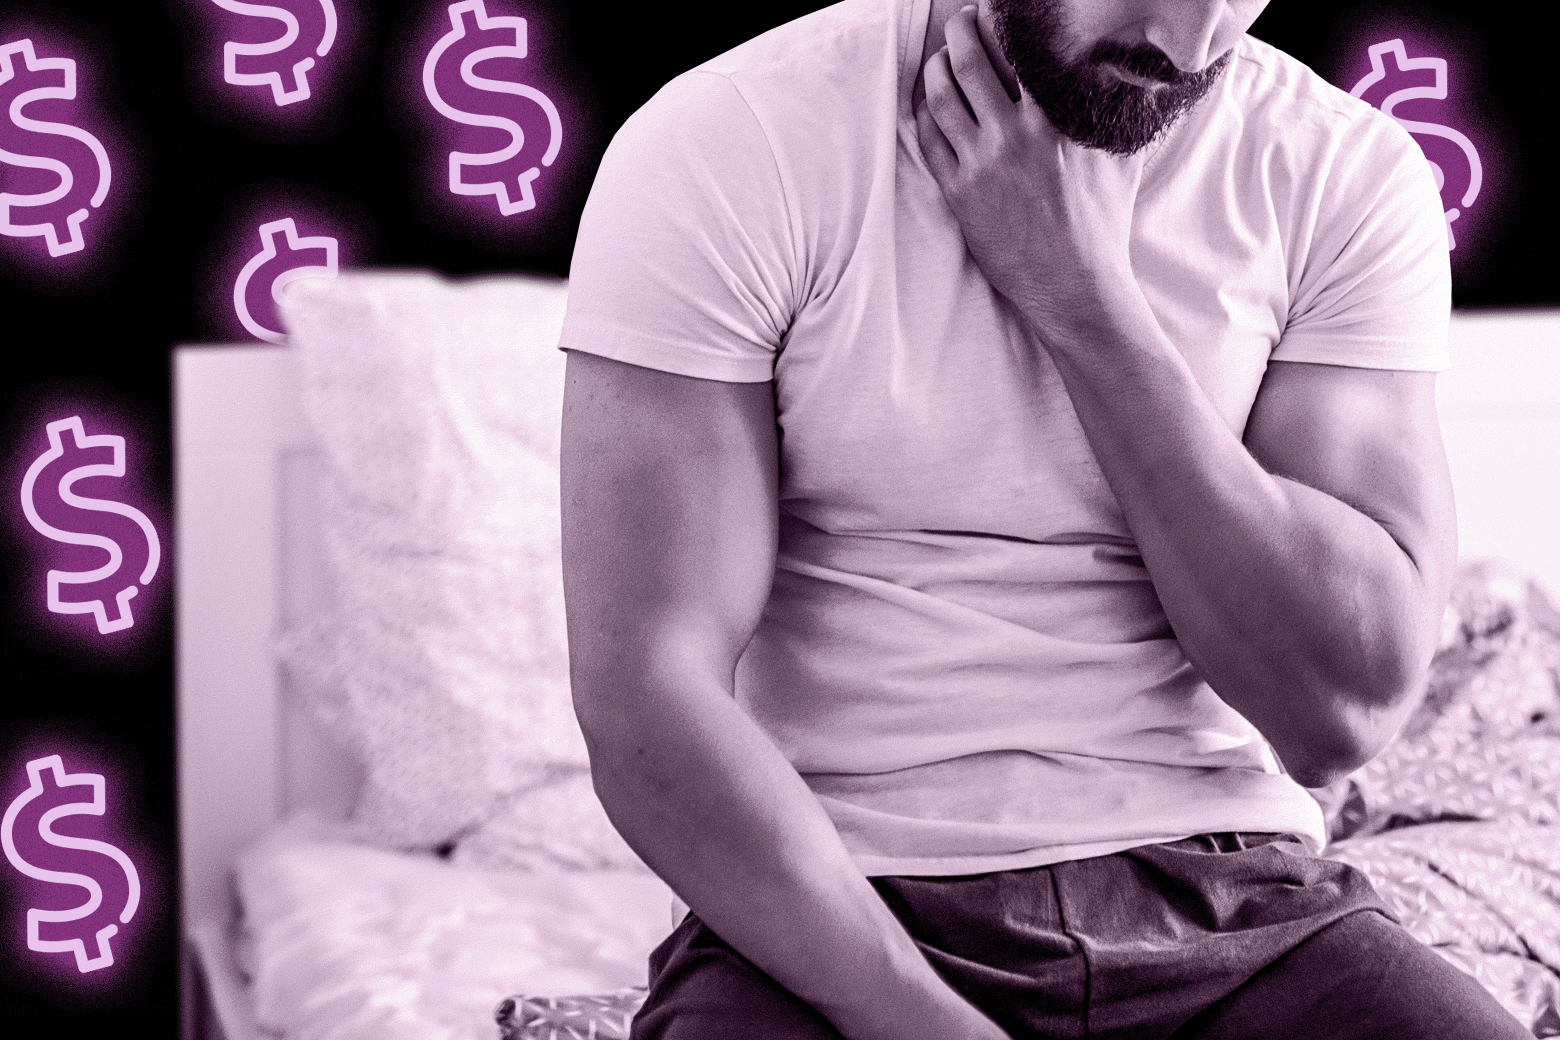 Bad Besties Com - Is it unhealthy to pay your friends for sex? Because I just did.